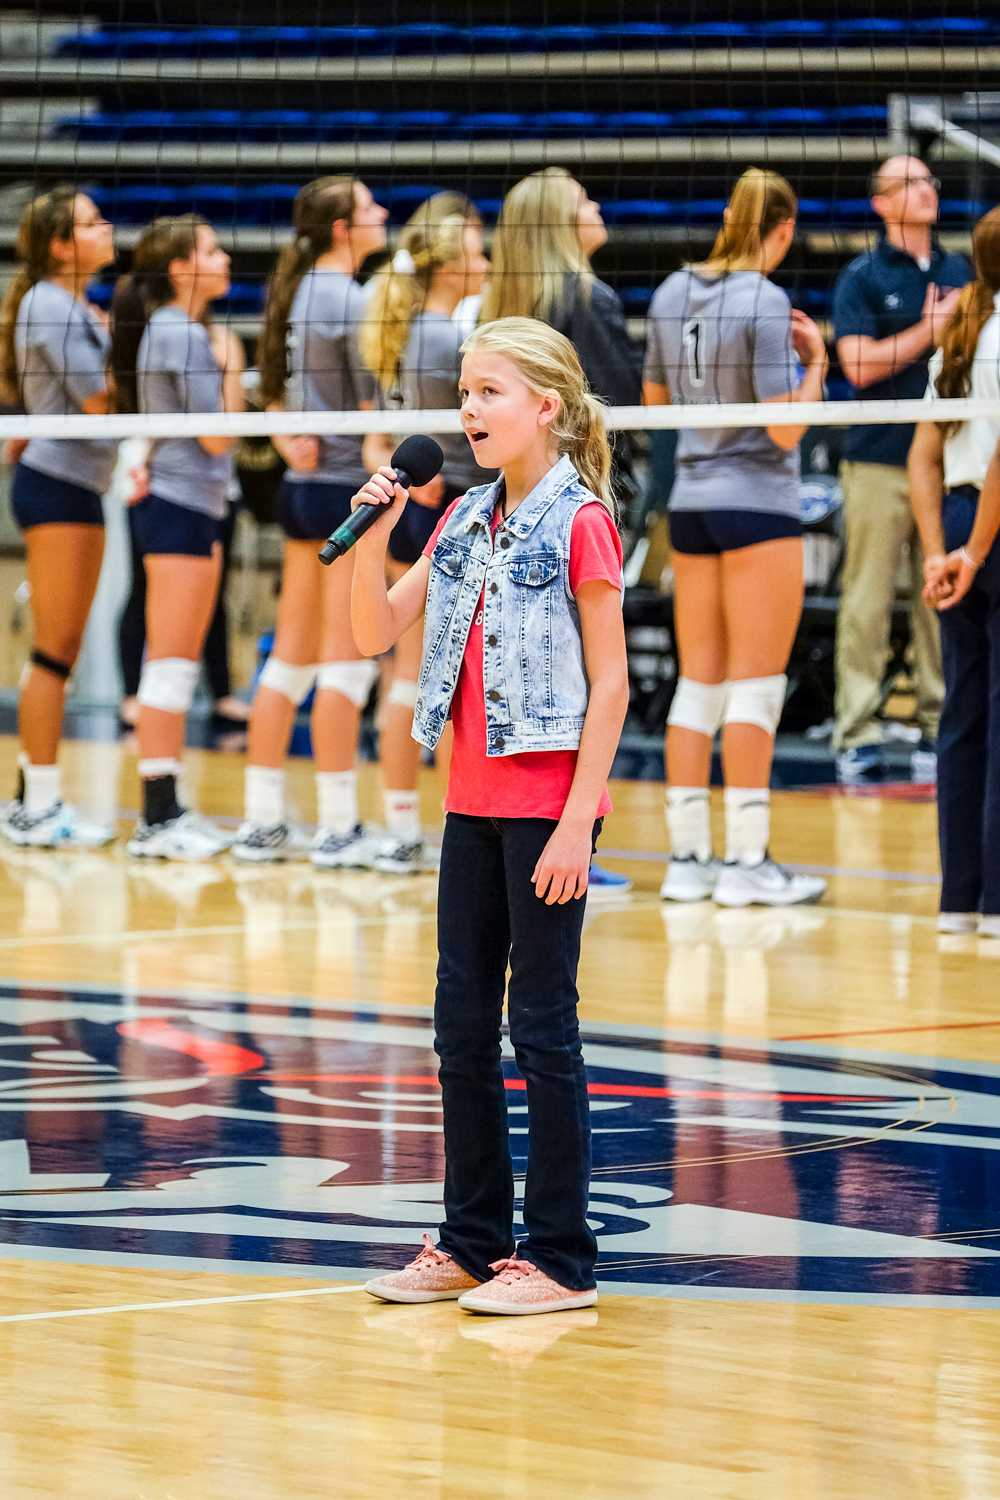 A young performer sings the National Anthem before the start of Friday’s match between UTEP and FAU. Mohammed F Emran | Staff Photographer